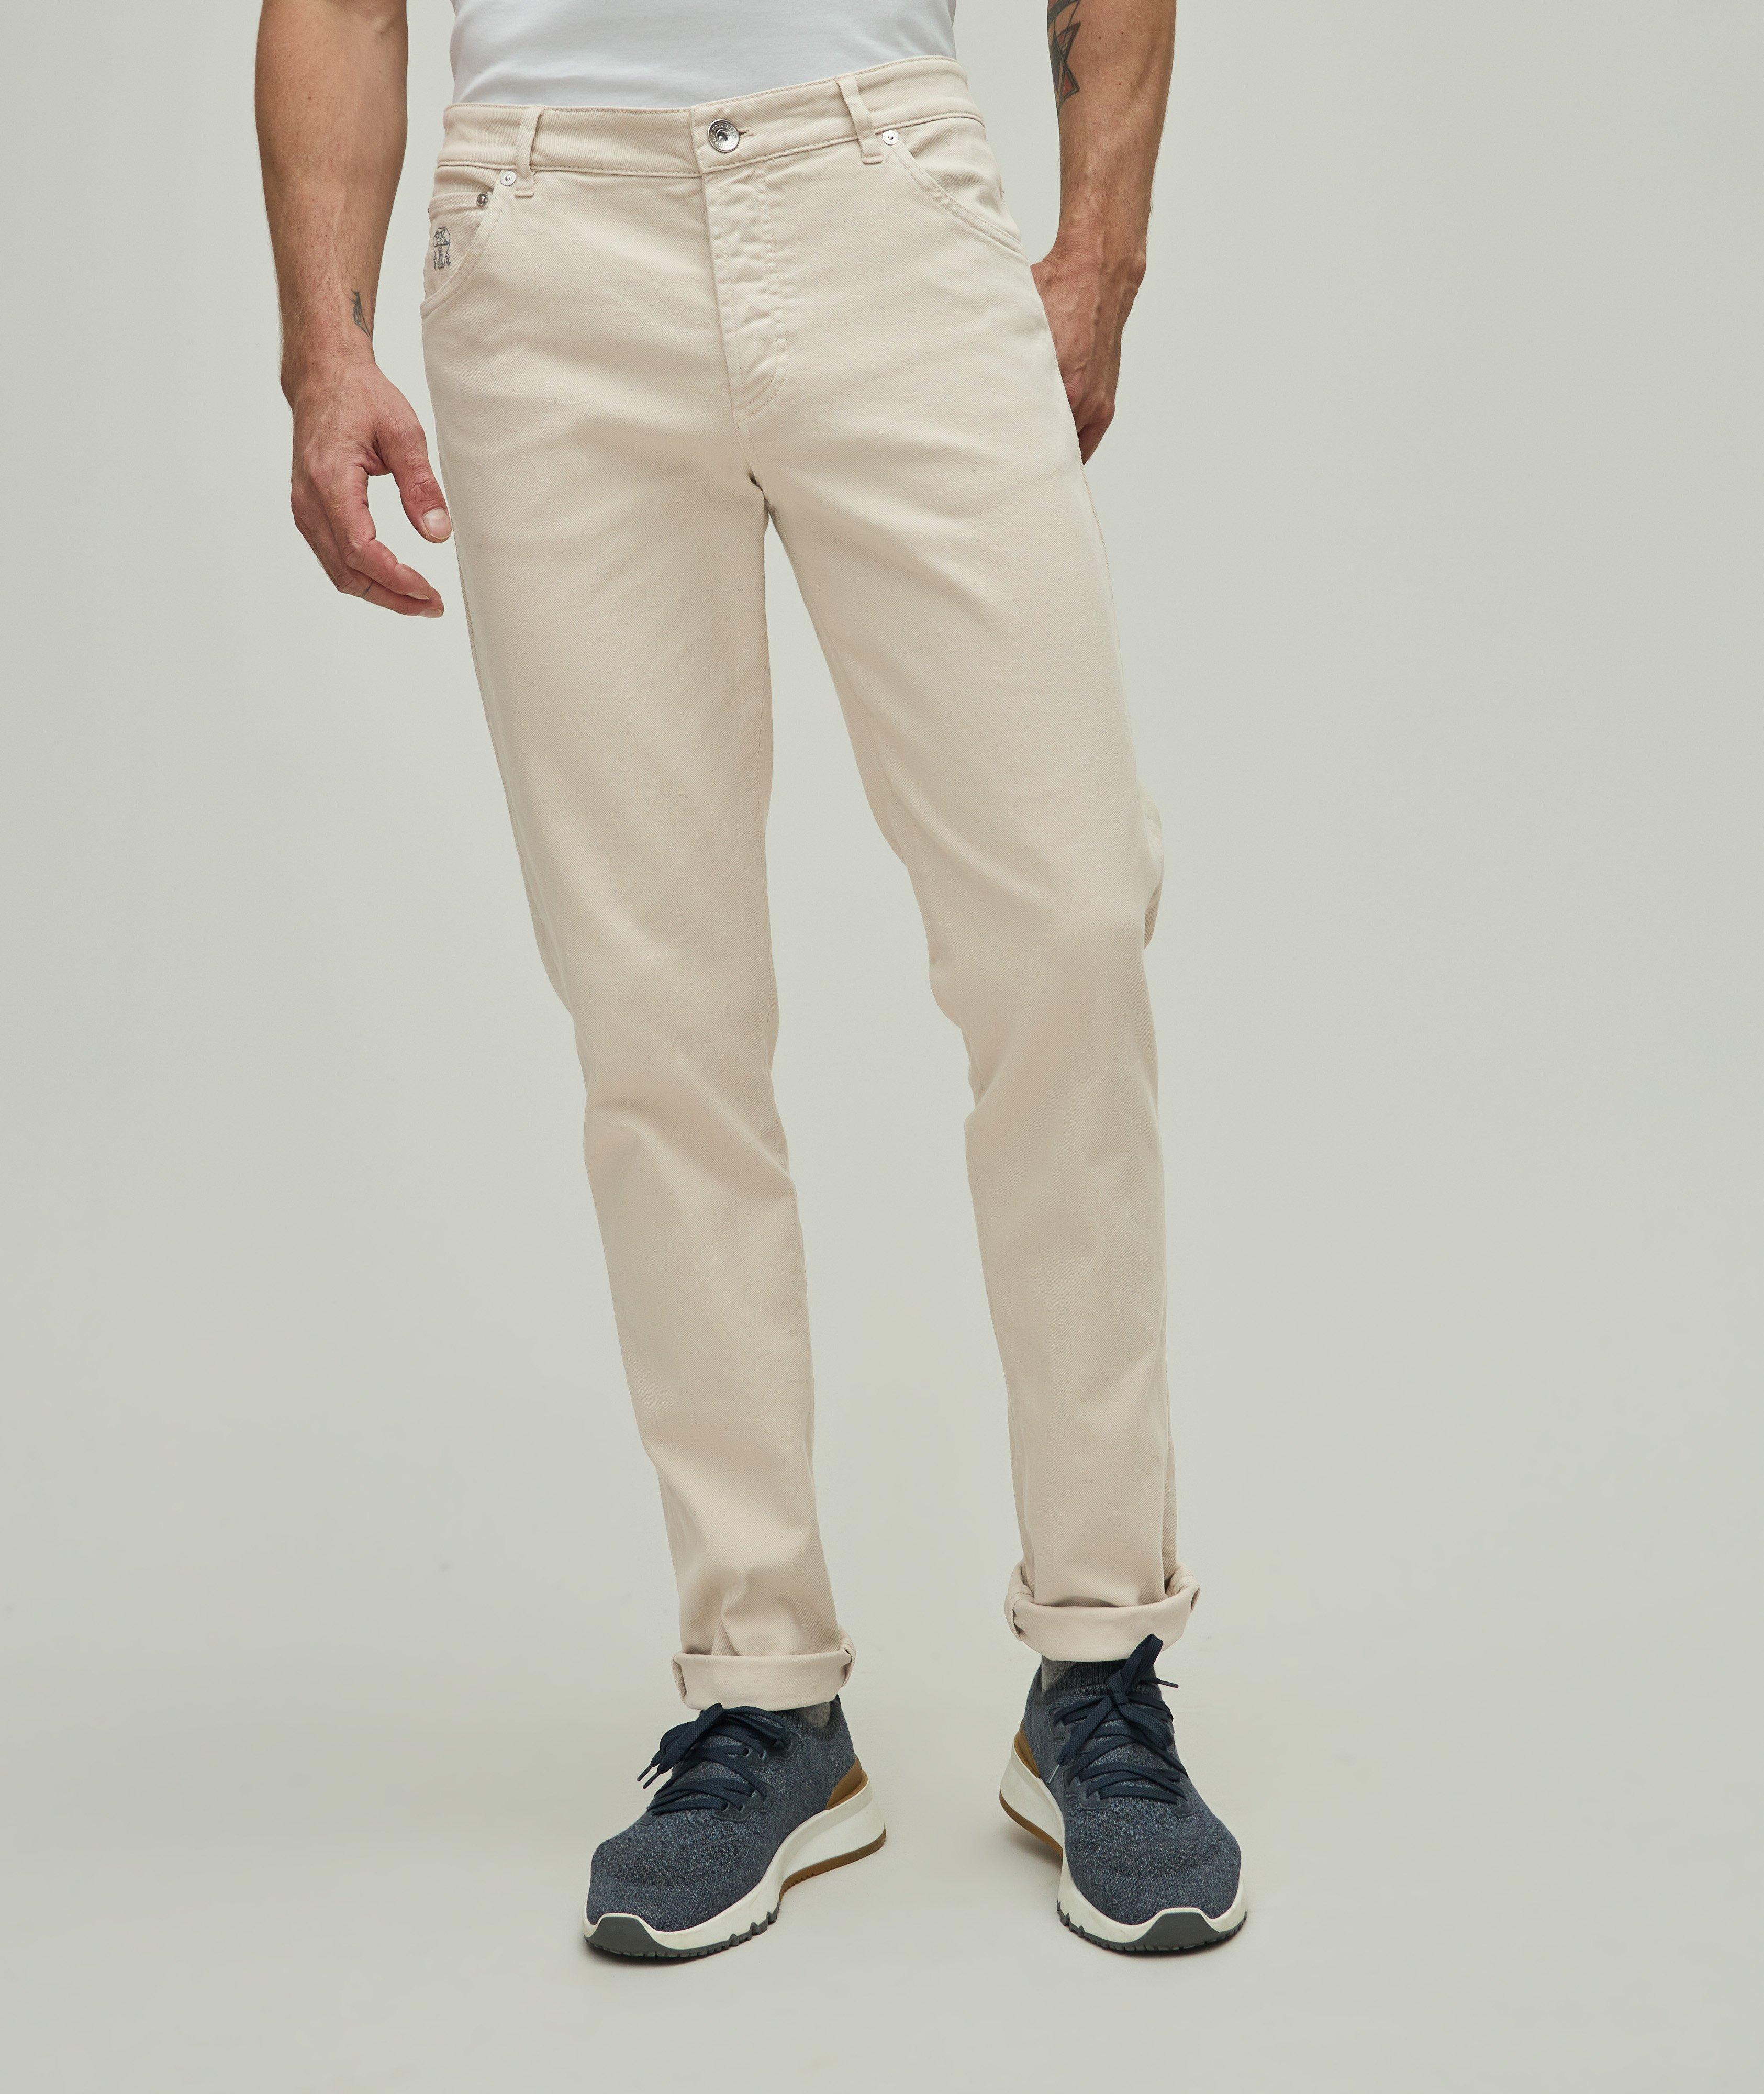 Skinny-Fit Stretch-Cotton Jeans image 1